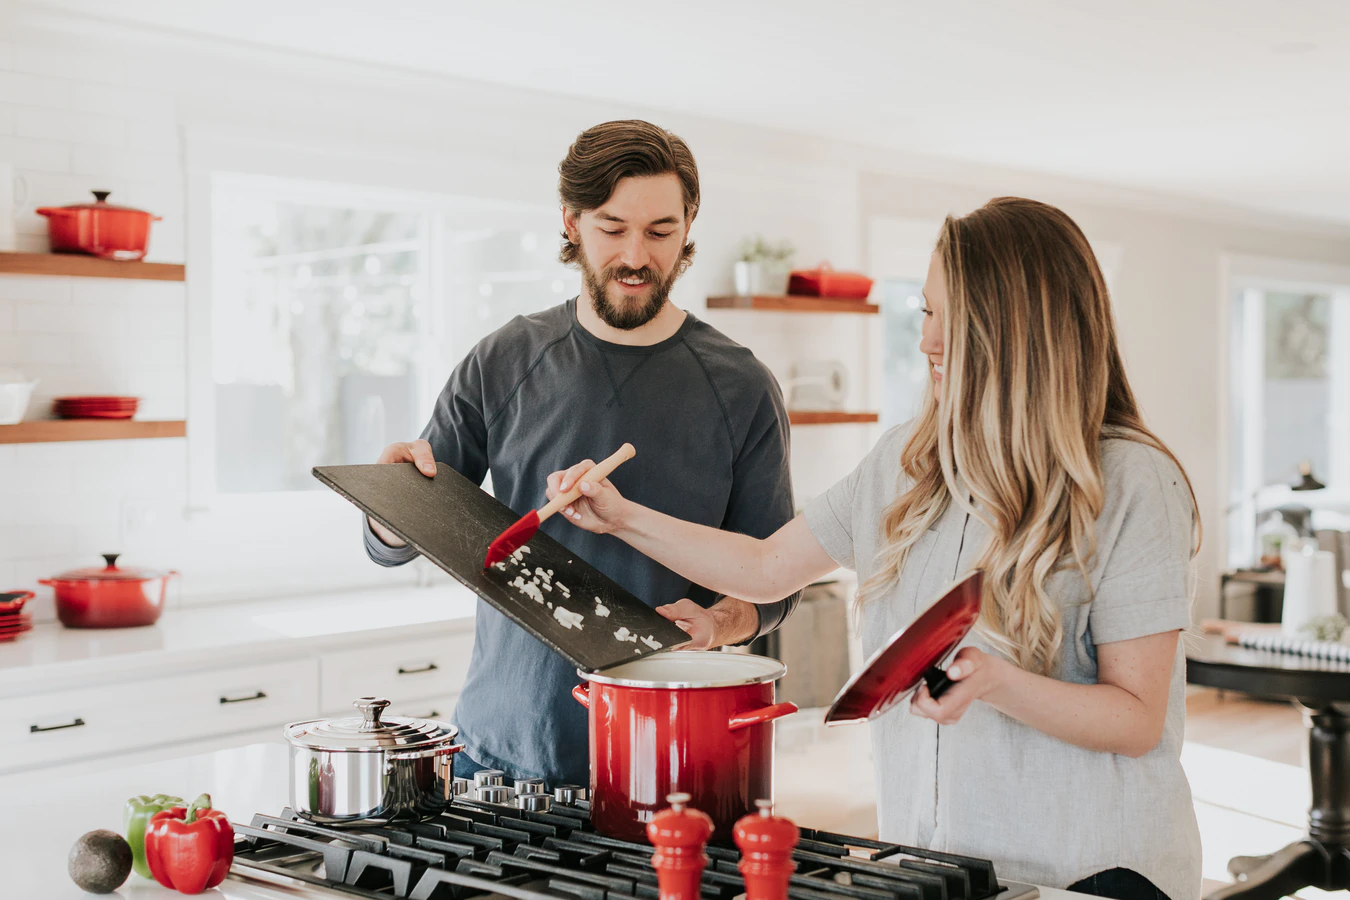 A man with a beard and a women with blonde hair cooking together in the kitchen with a red pot and black chopping board